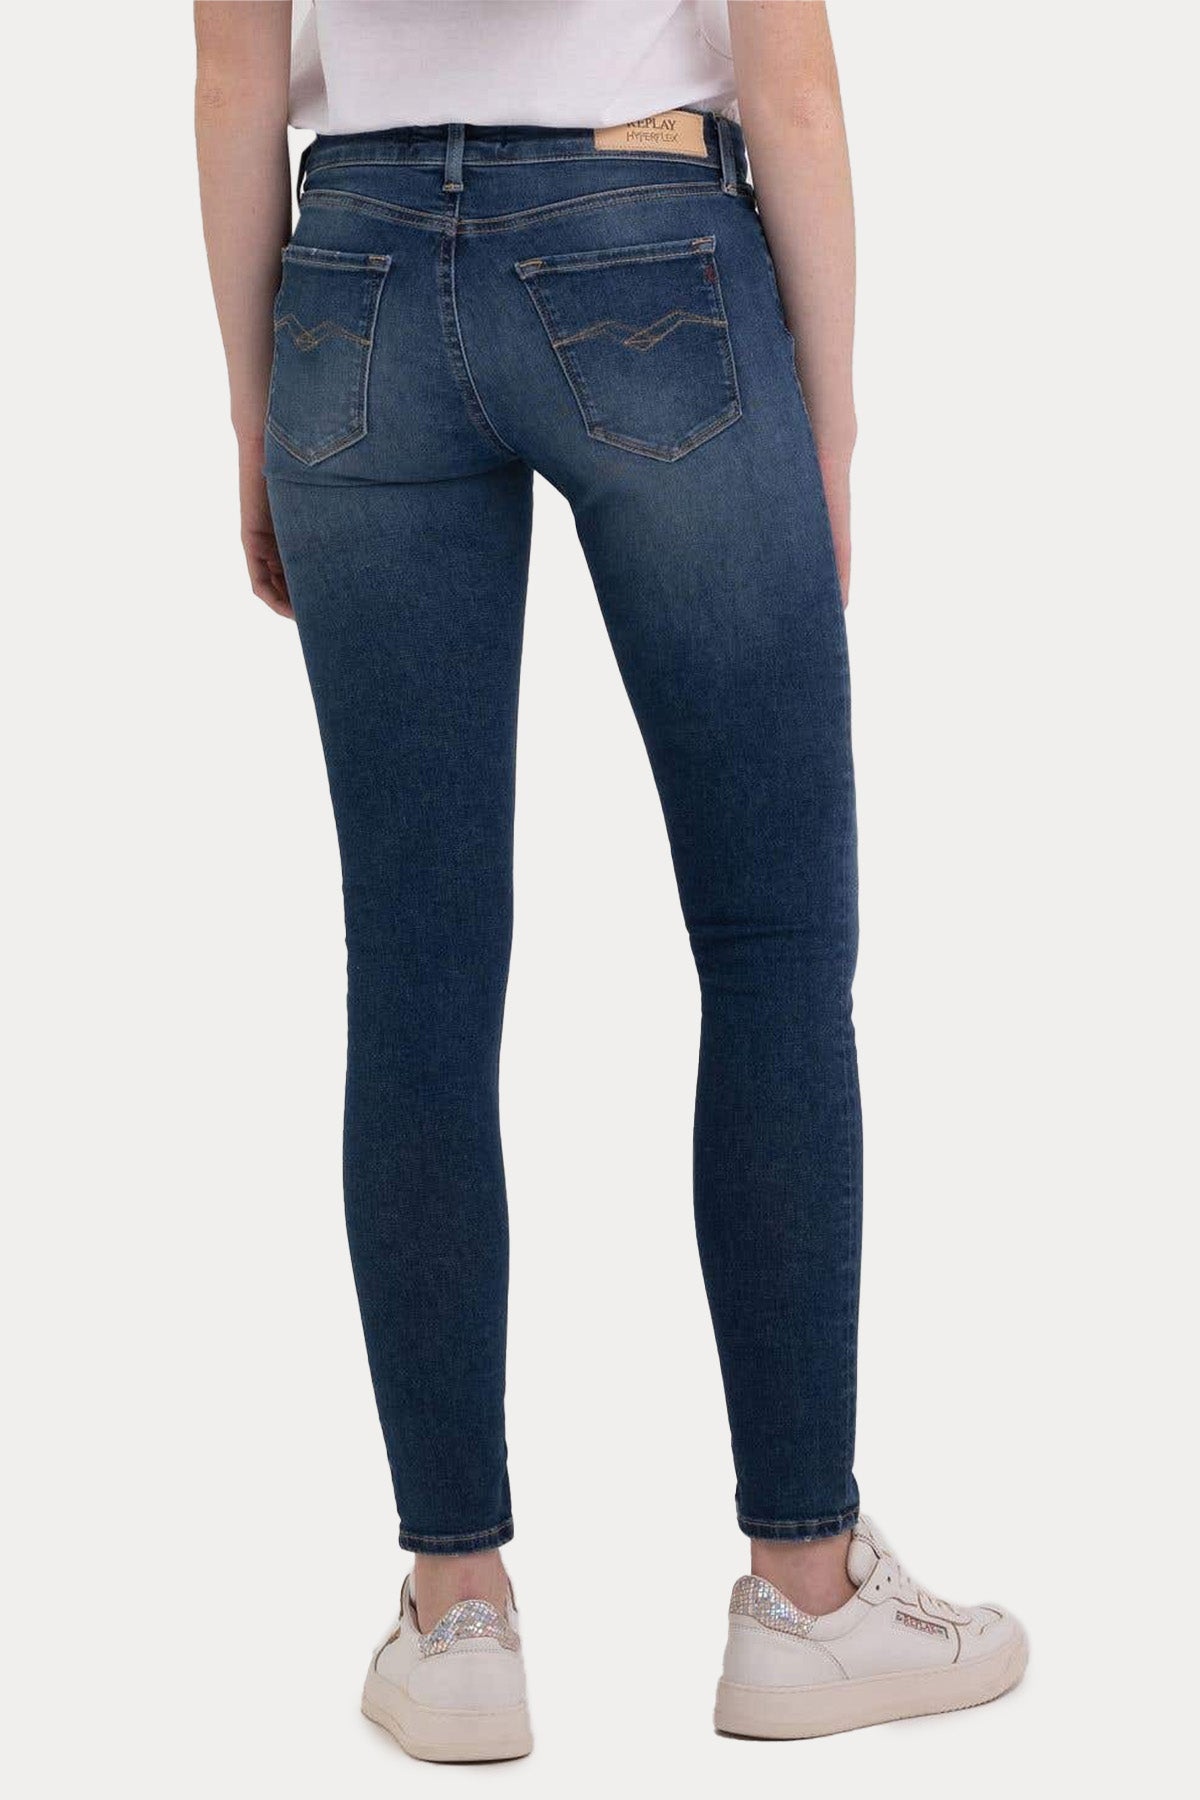 Replay Hyperflex Re-Used New Luz Skinny Fit Jeans